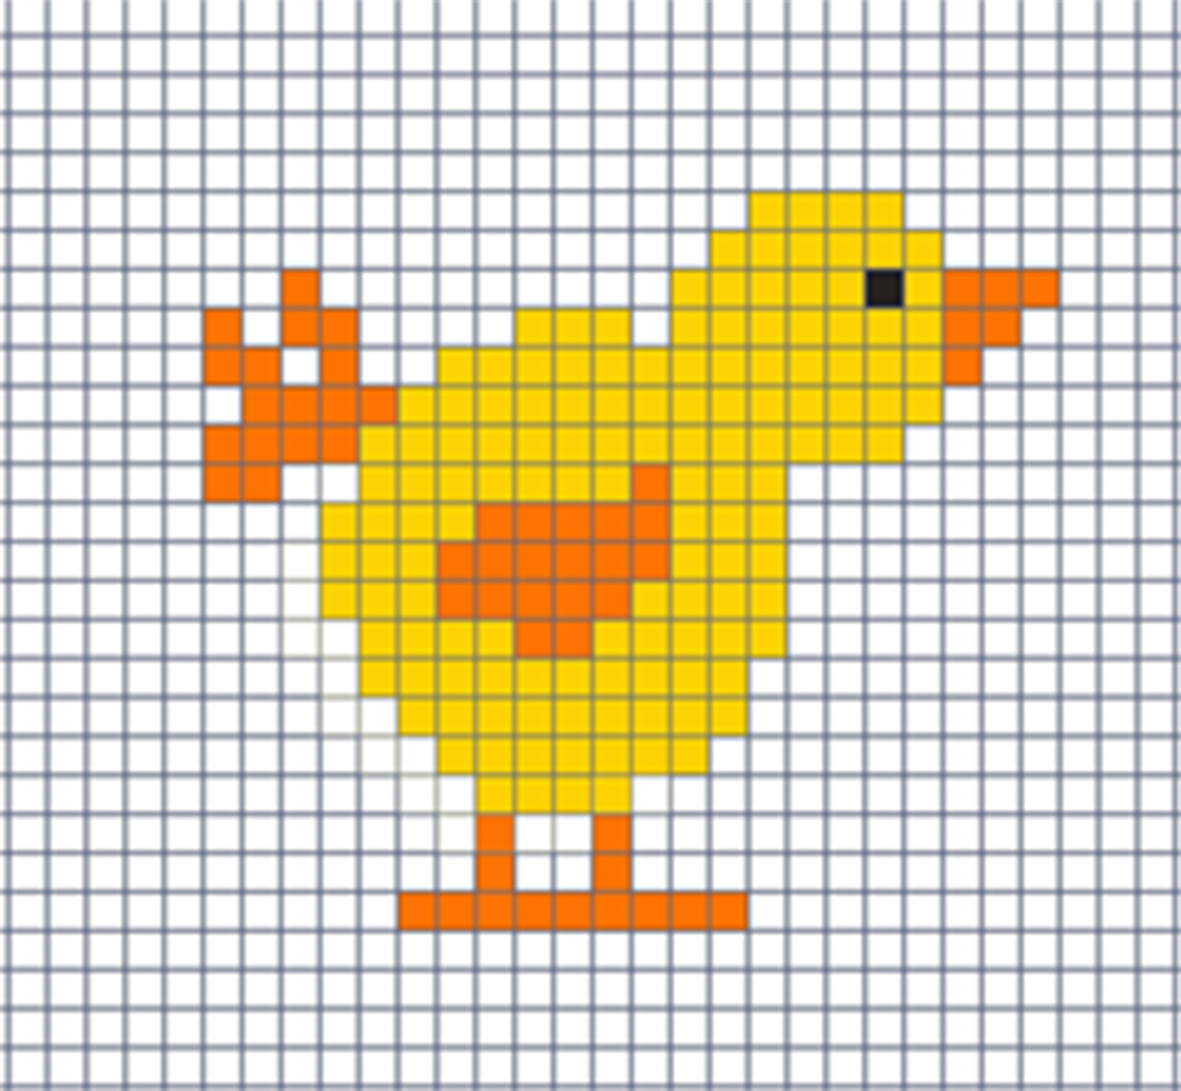 Template for hama beads: yellow chicken for Easter.